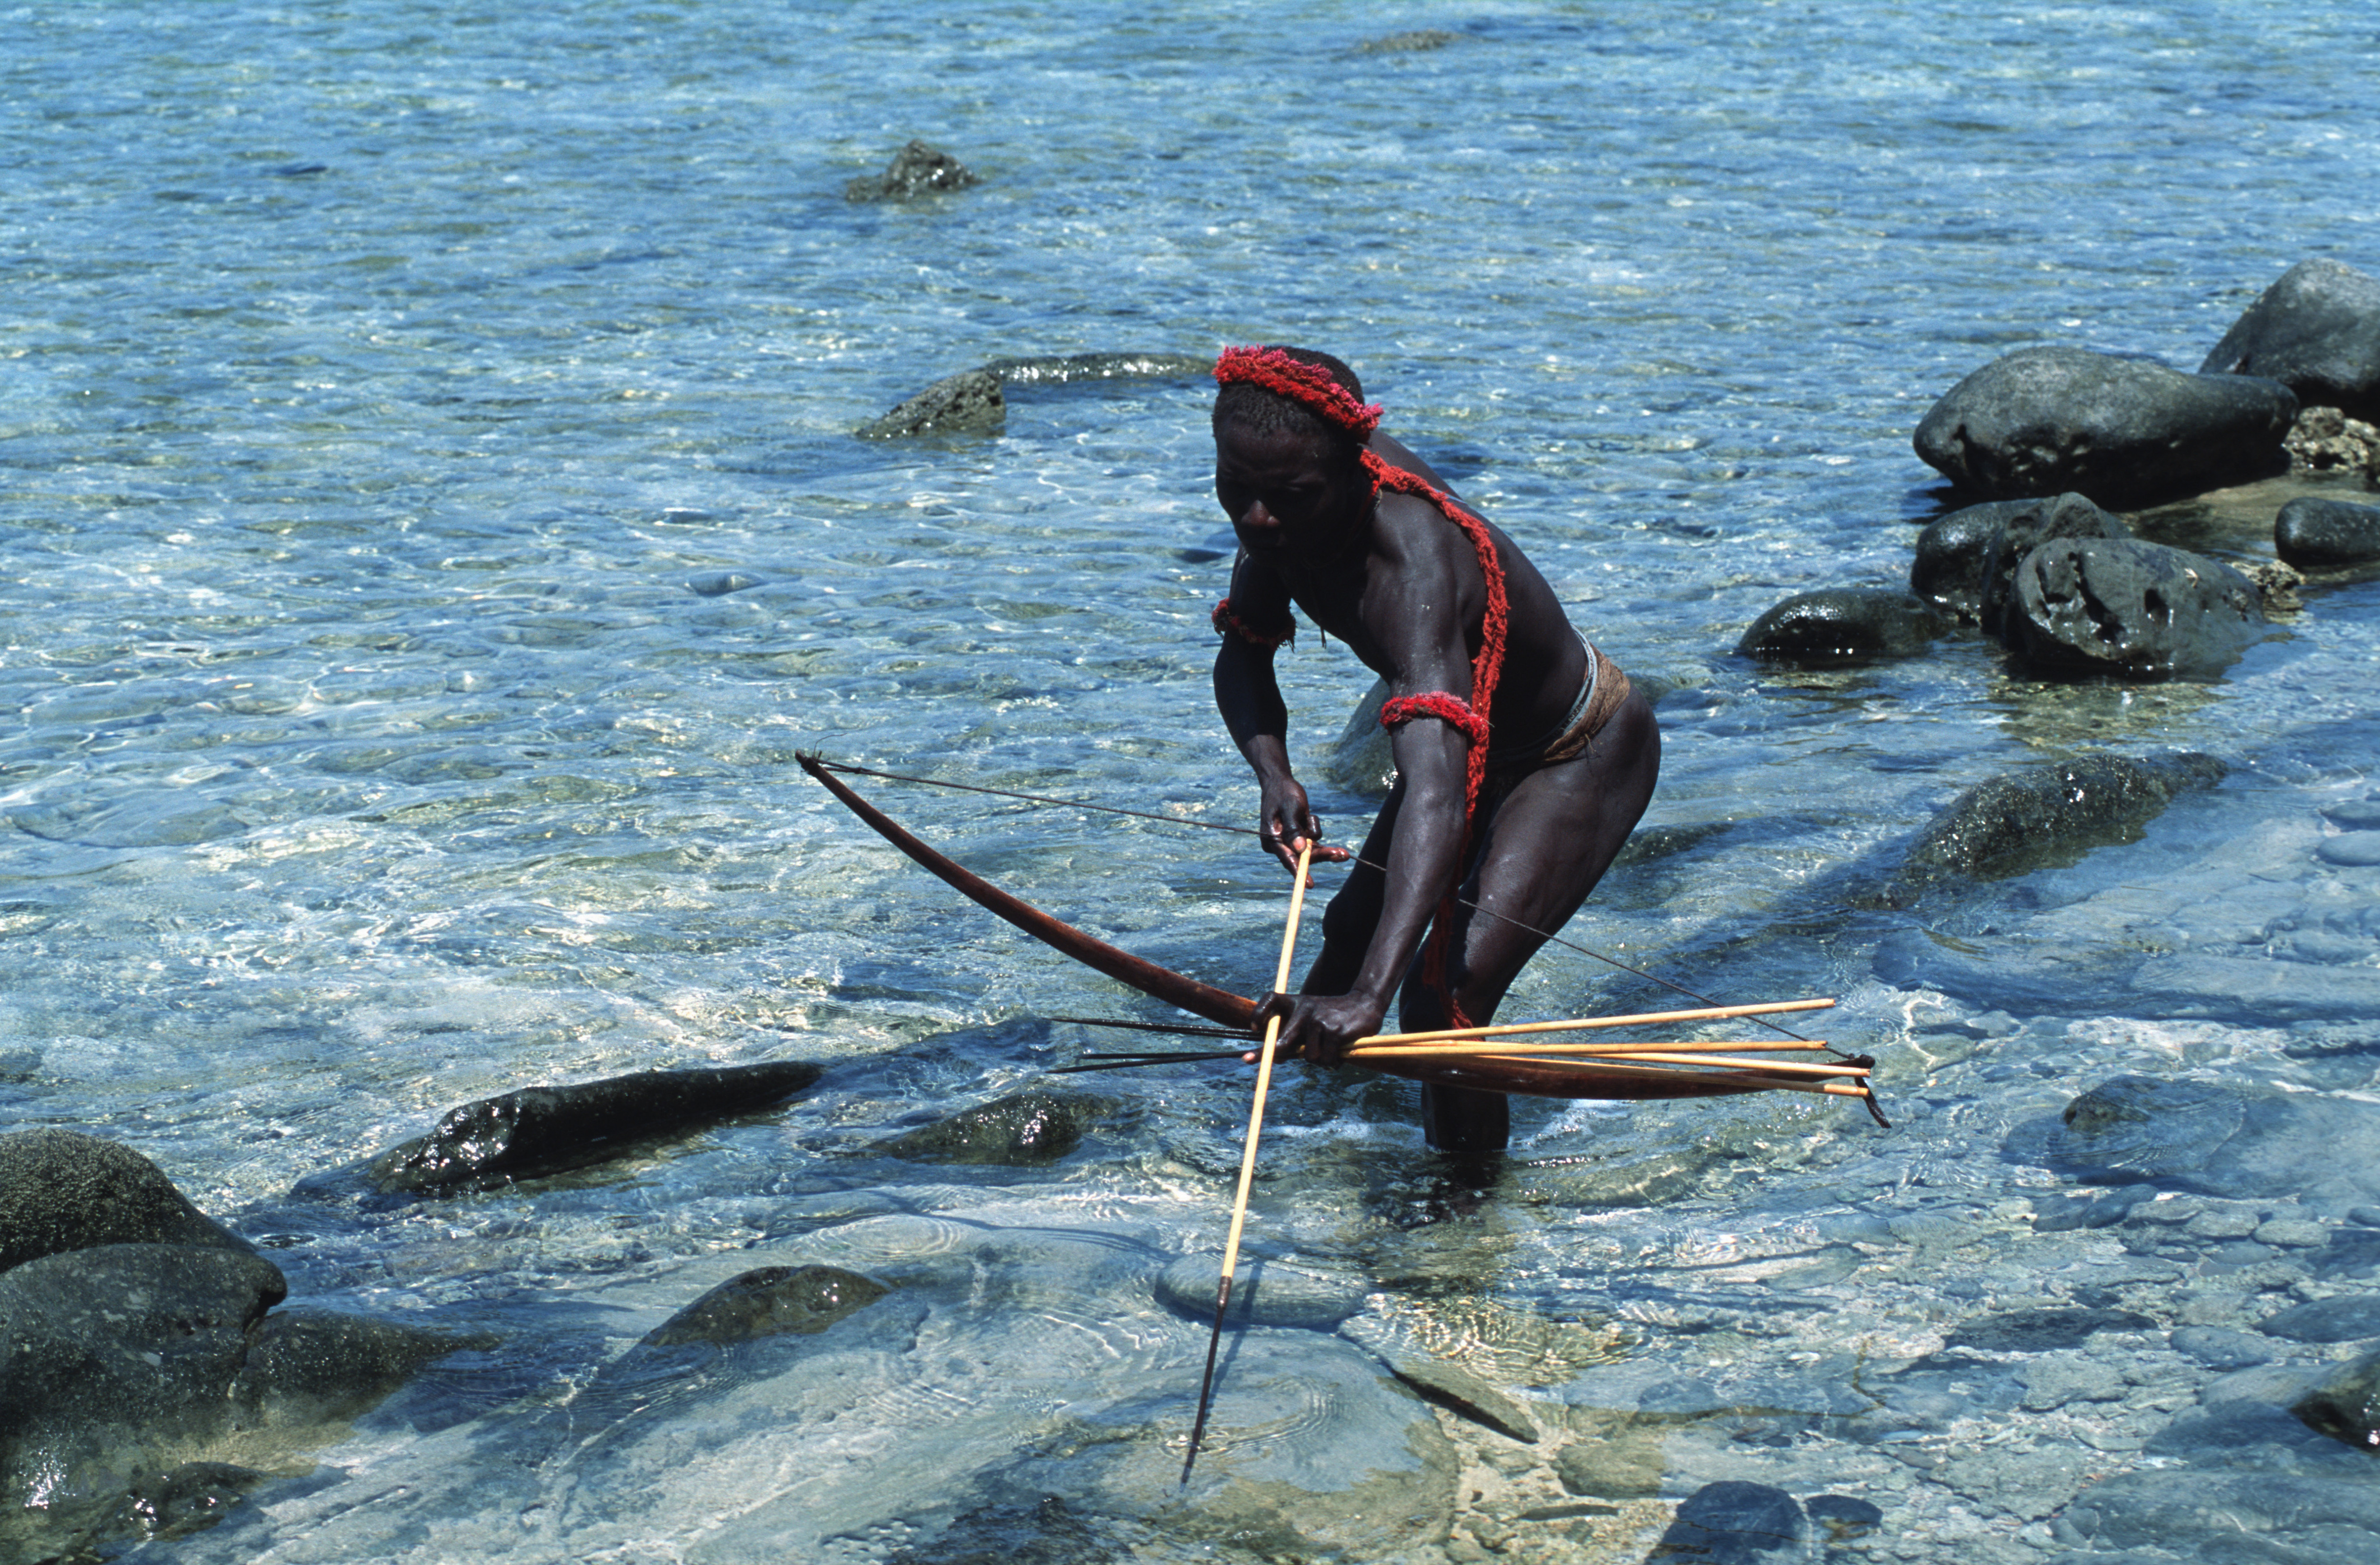 A Jarawa man catching fish with bow and arrow